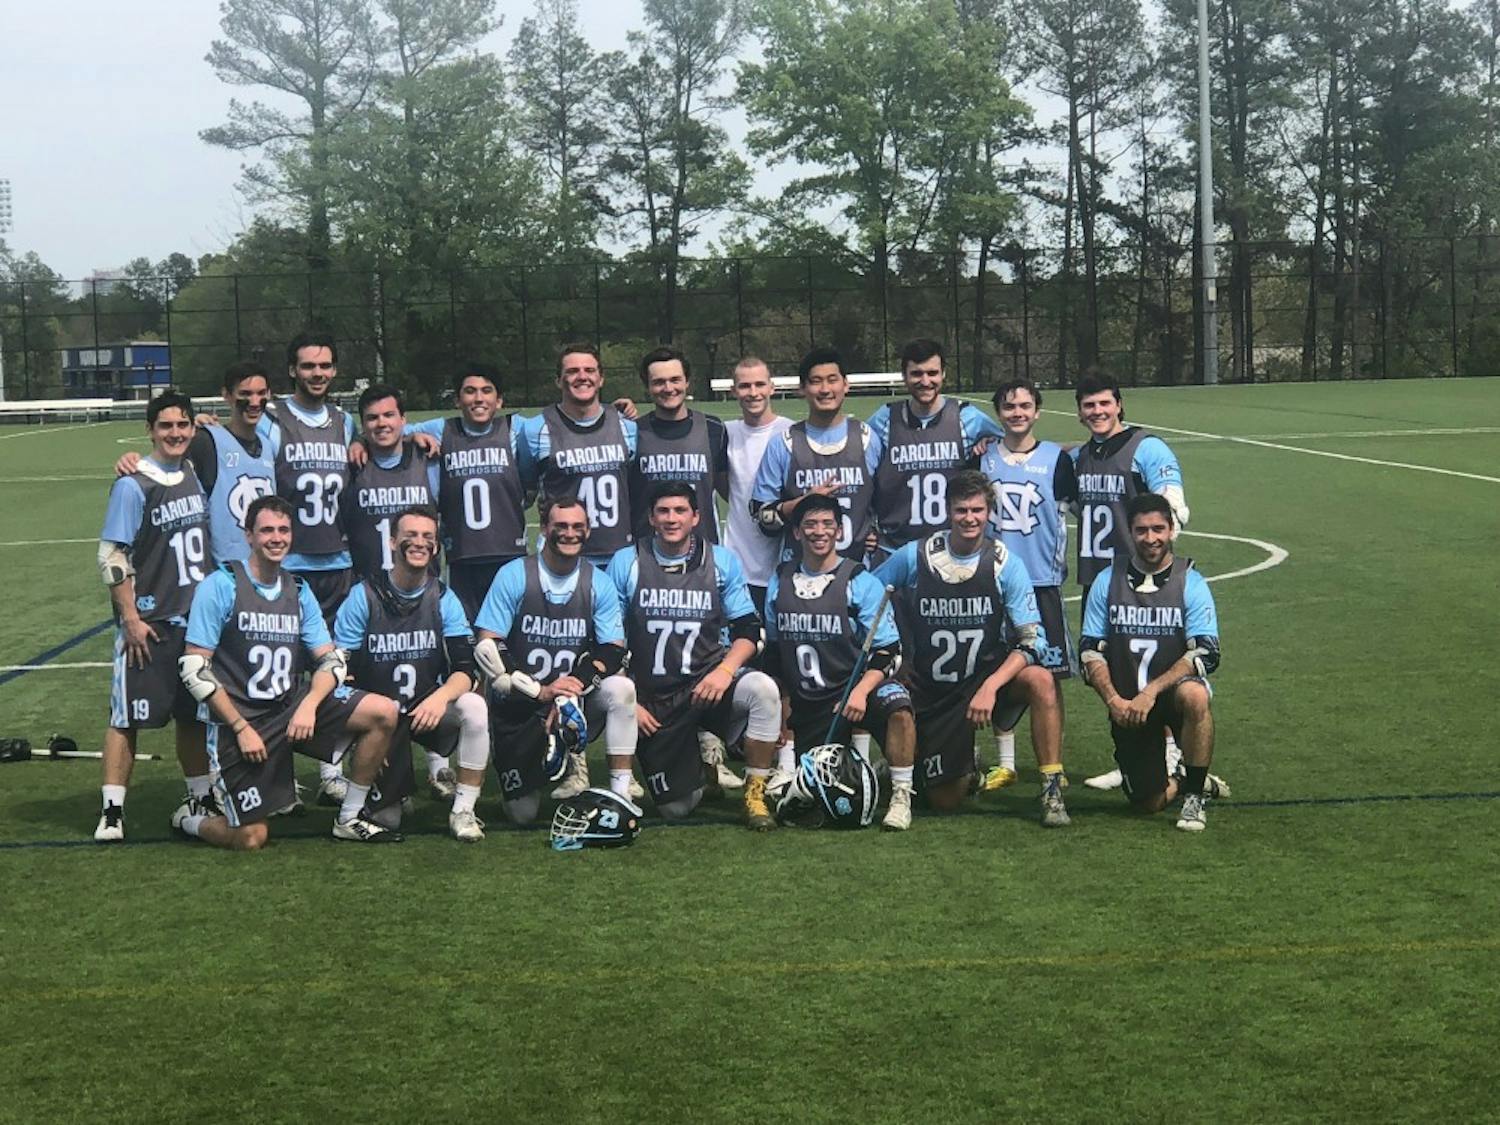 The UNC club lacrosse team poses after a win against Duke in 2018. UNC won 7-5.
Photo courtesy of Jackson Ozello.